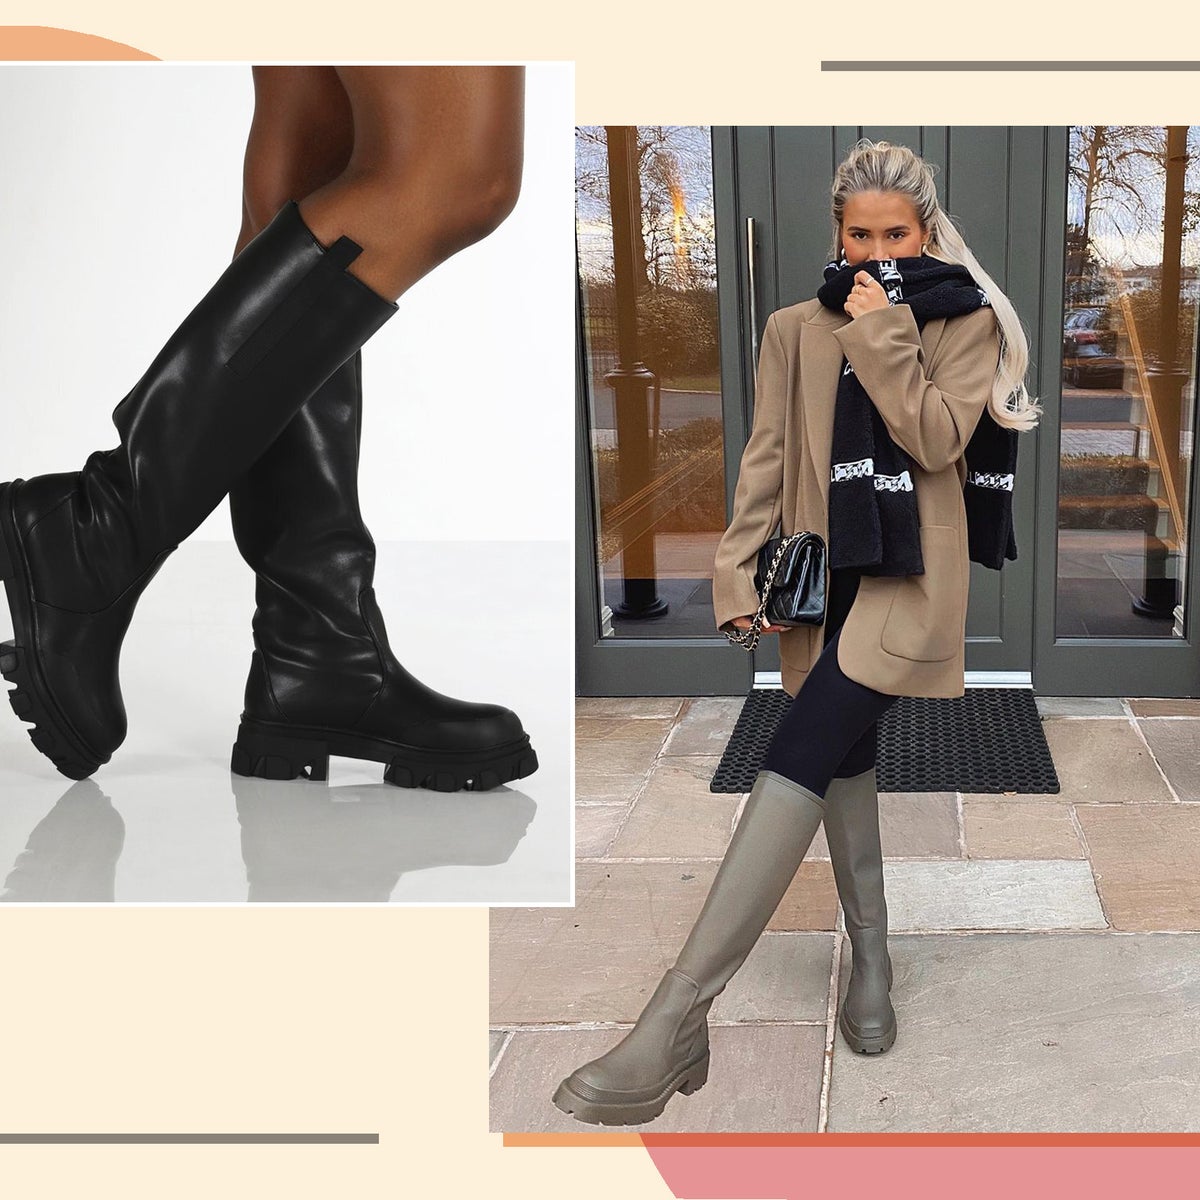 Zara wellies 2021: We've found a wide-fit dupe for the sell-out